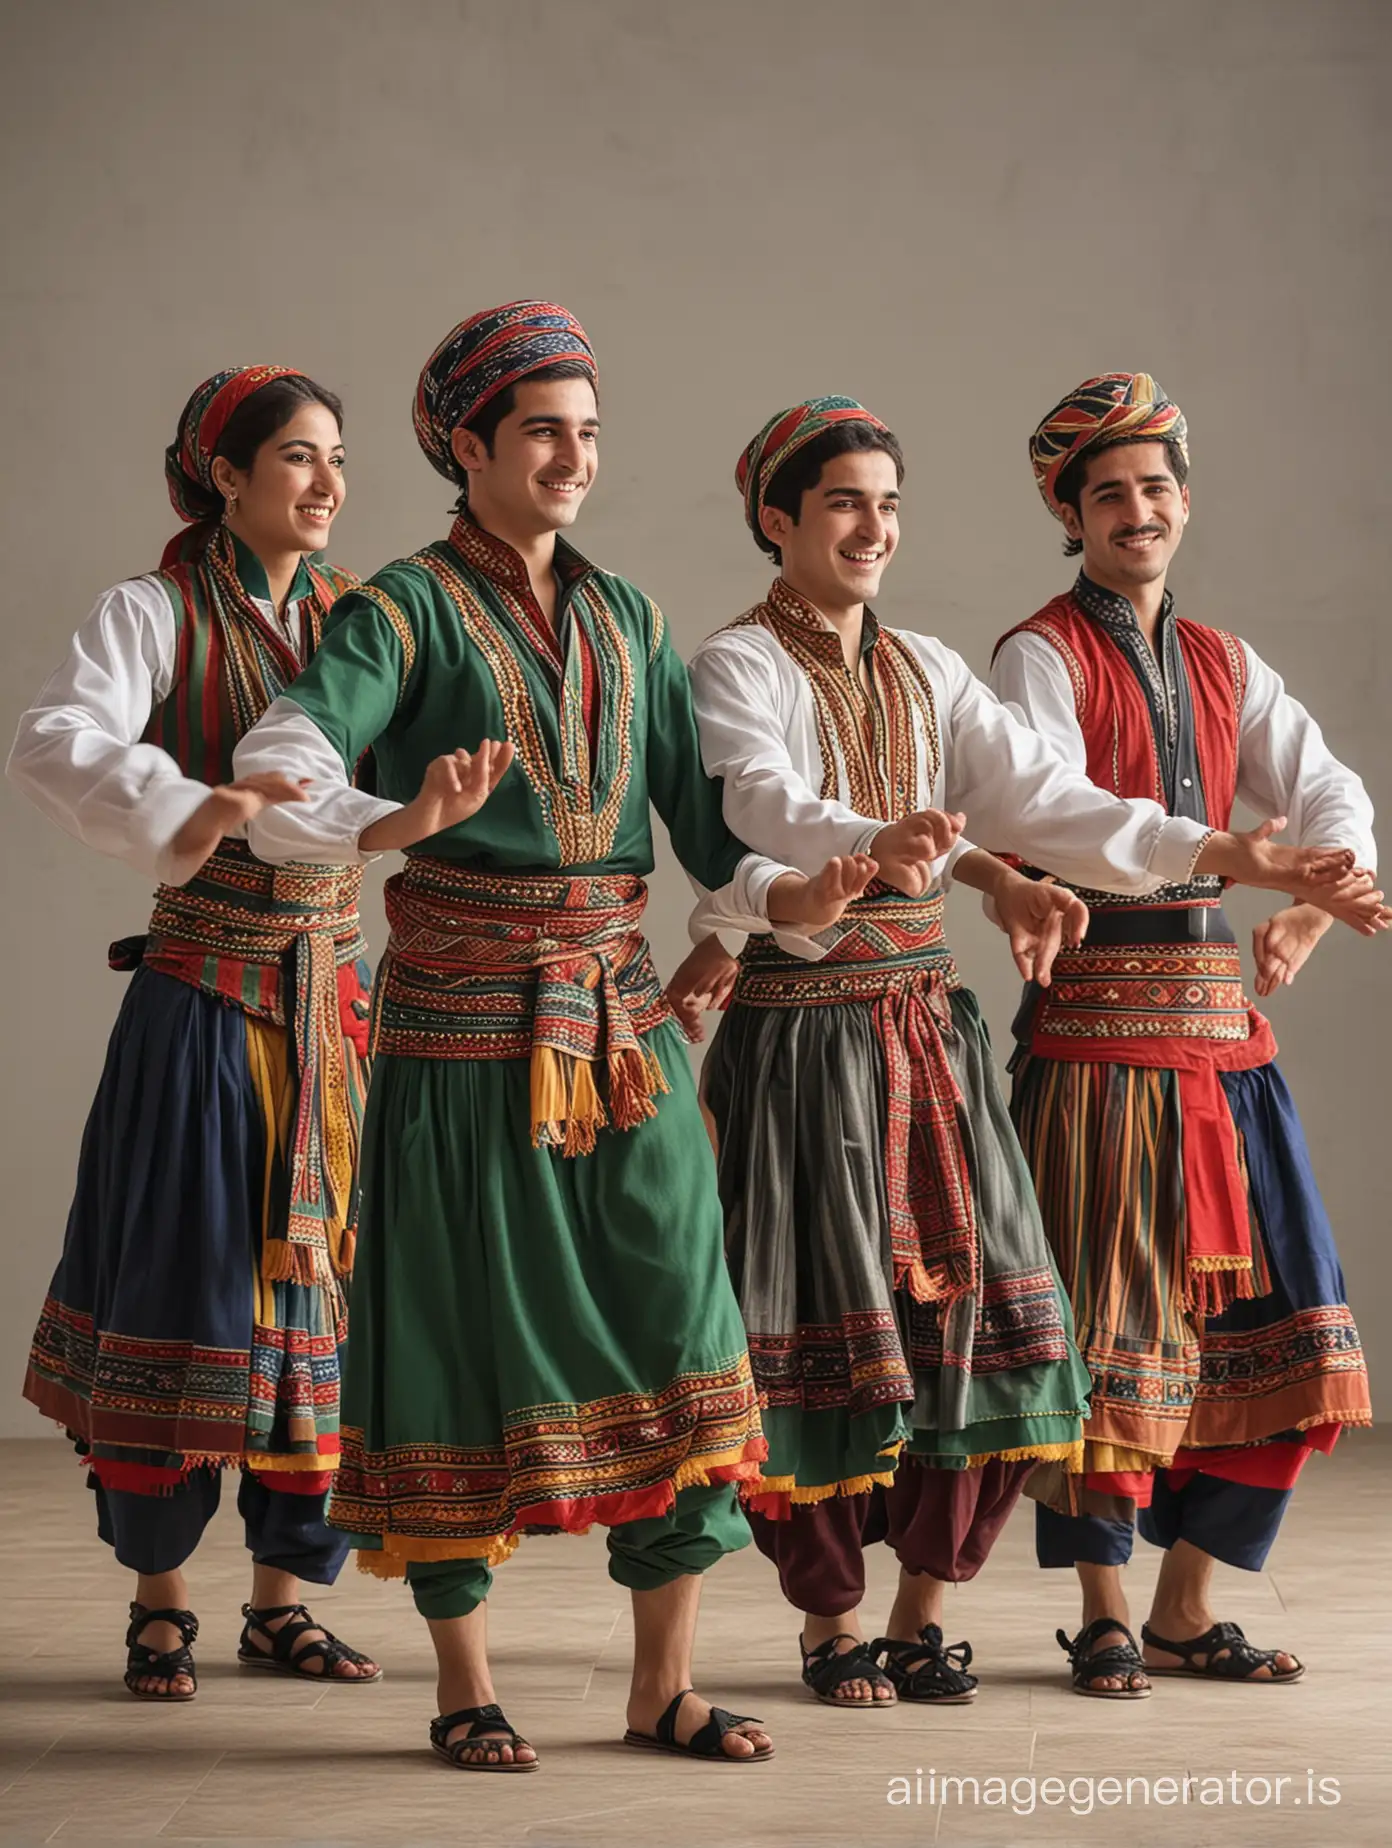 Traditional-Kurdish-Dance-Performance-by-Men-and-Women-in-Colorful-Attire-from-Iran